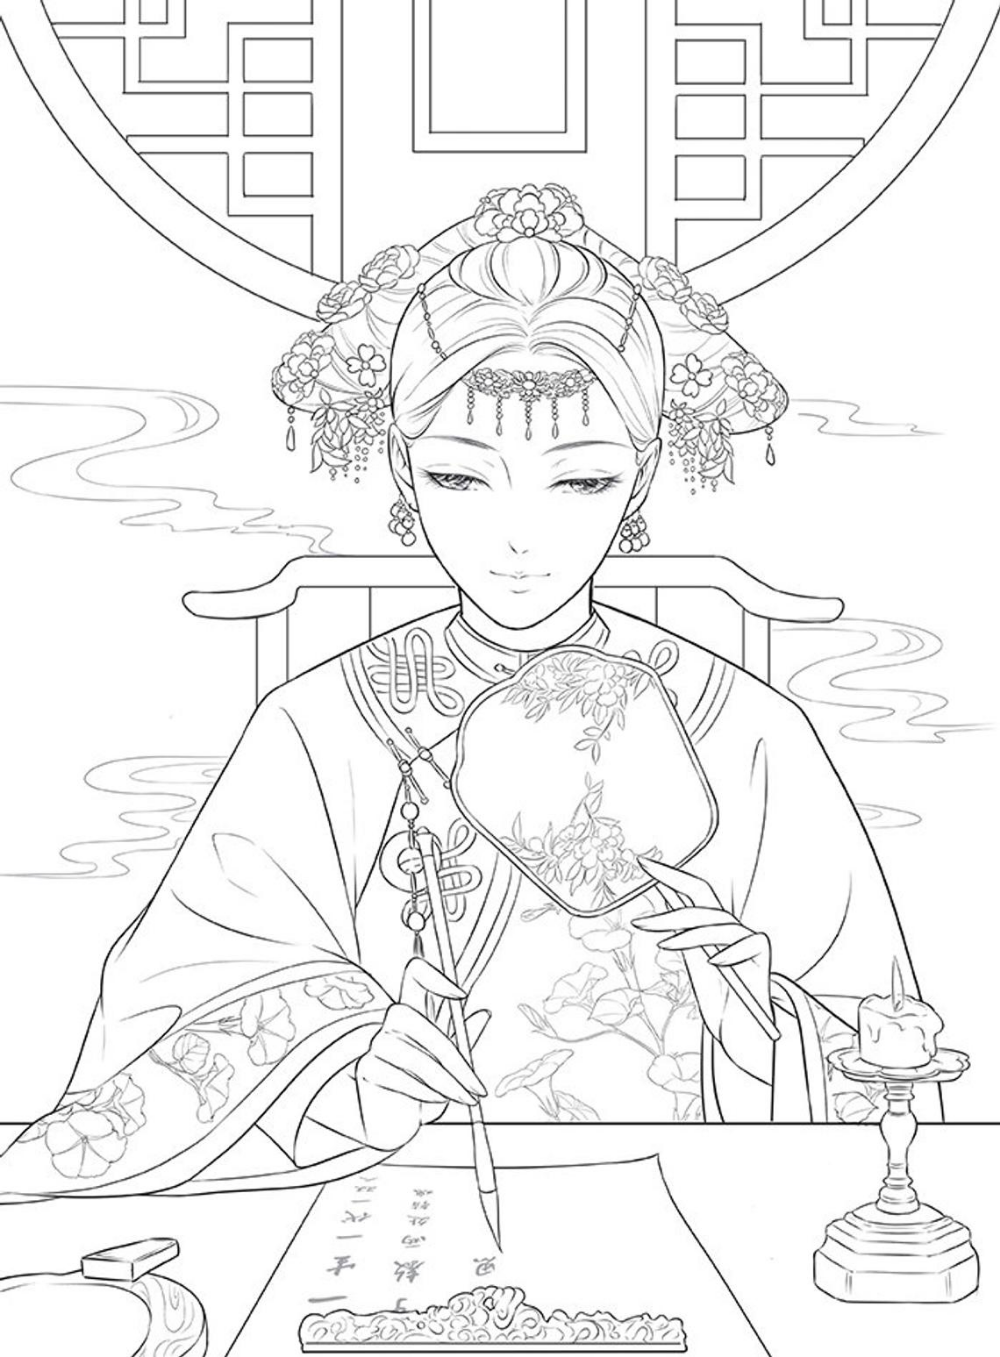 NEW! The Imperial Palace Chinese coloring book - Chinese Ancient Beauty coloring book - NEW! The Imperial Palace Chinese coloring book - Chinese Ancient Beauty coloring book -   11 beauty Day coloring book ideas